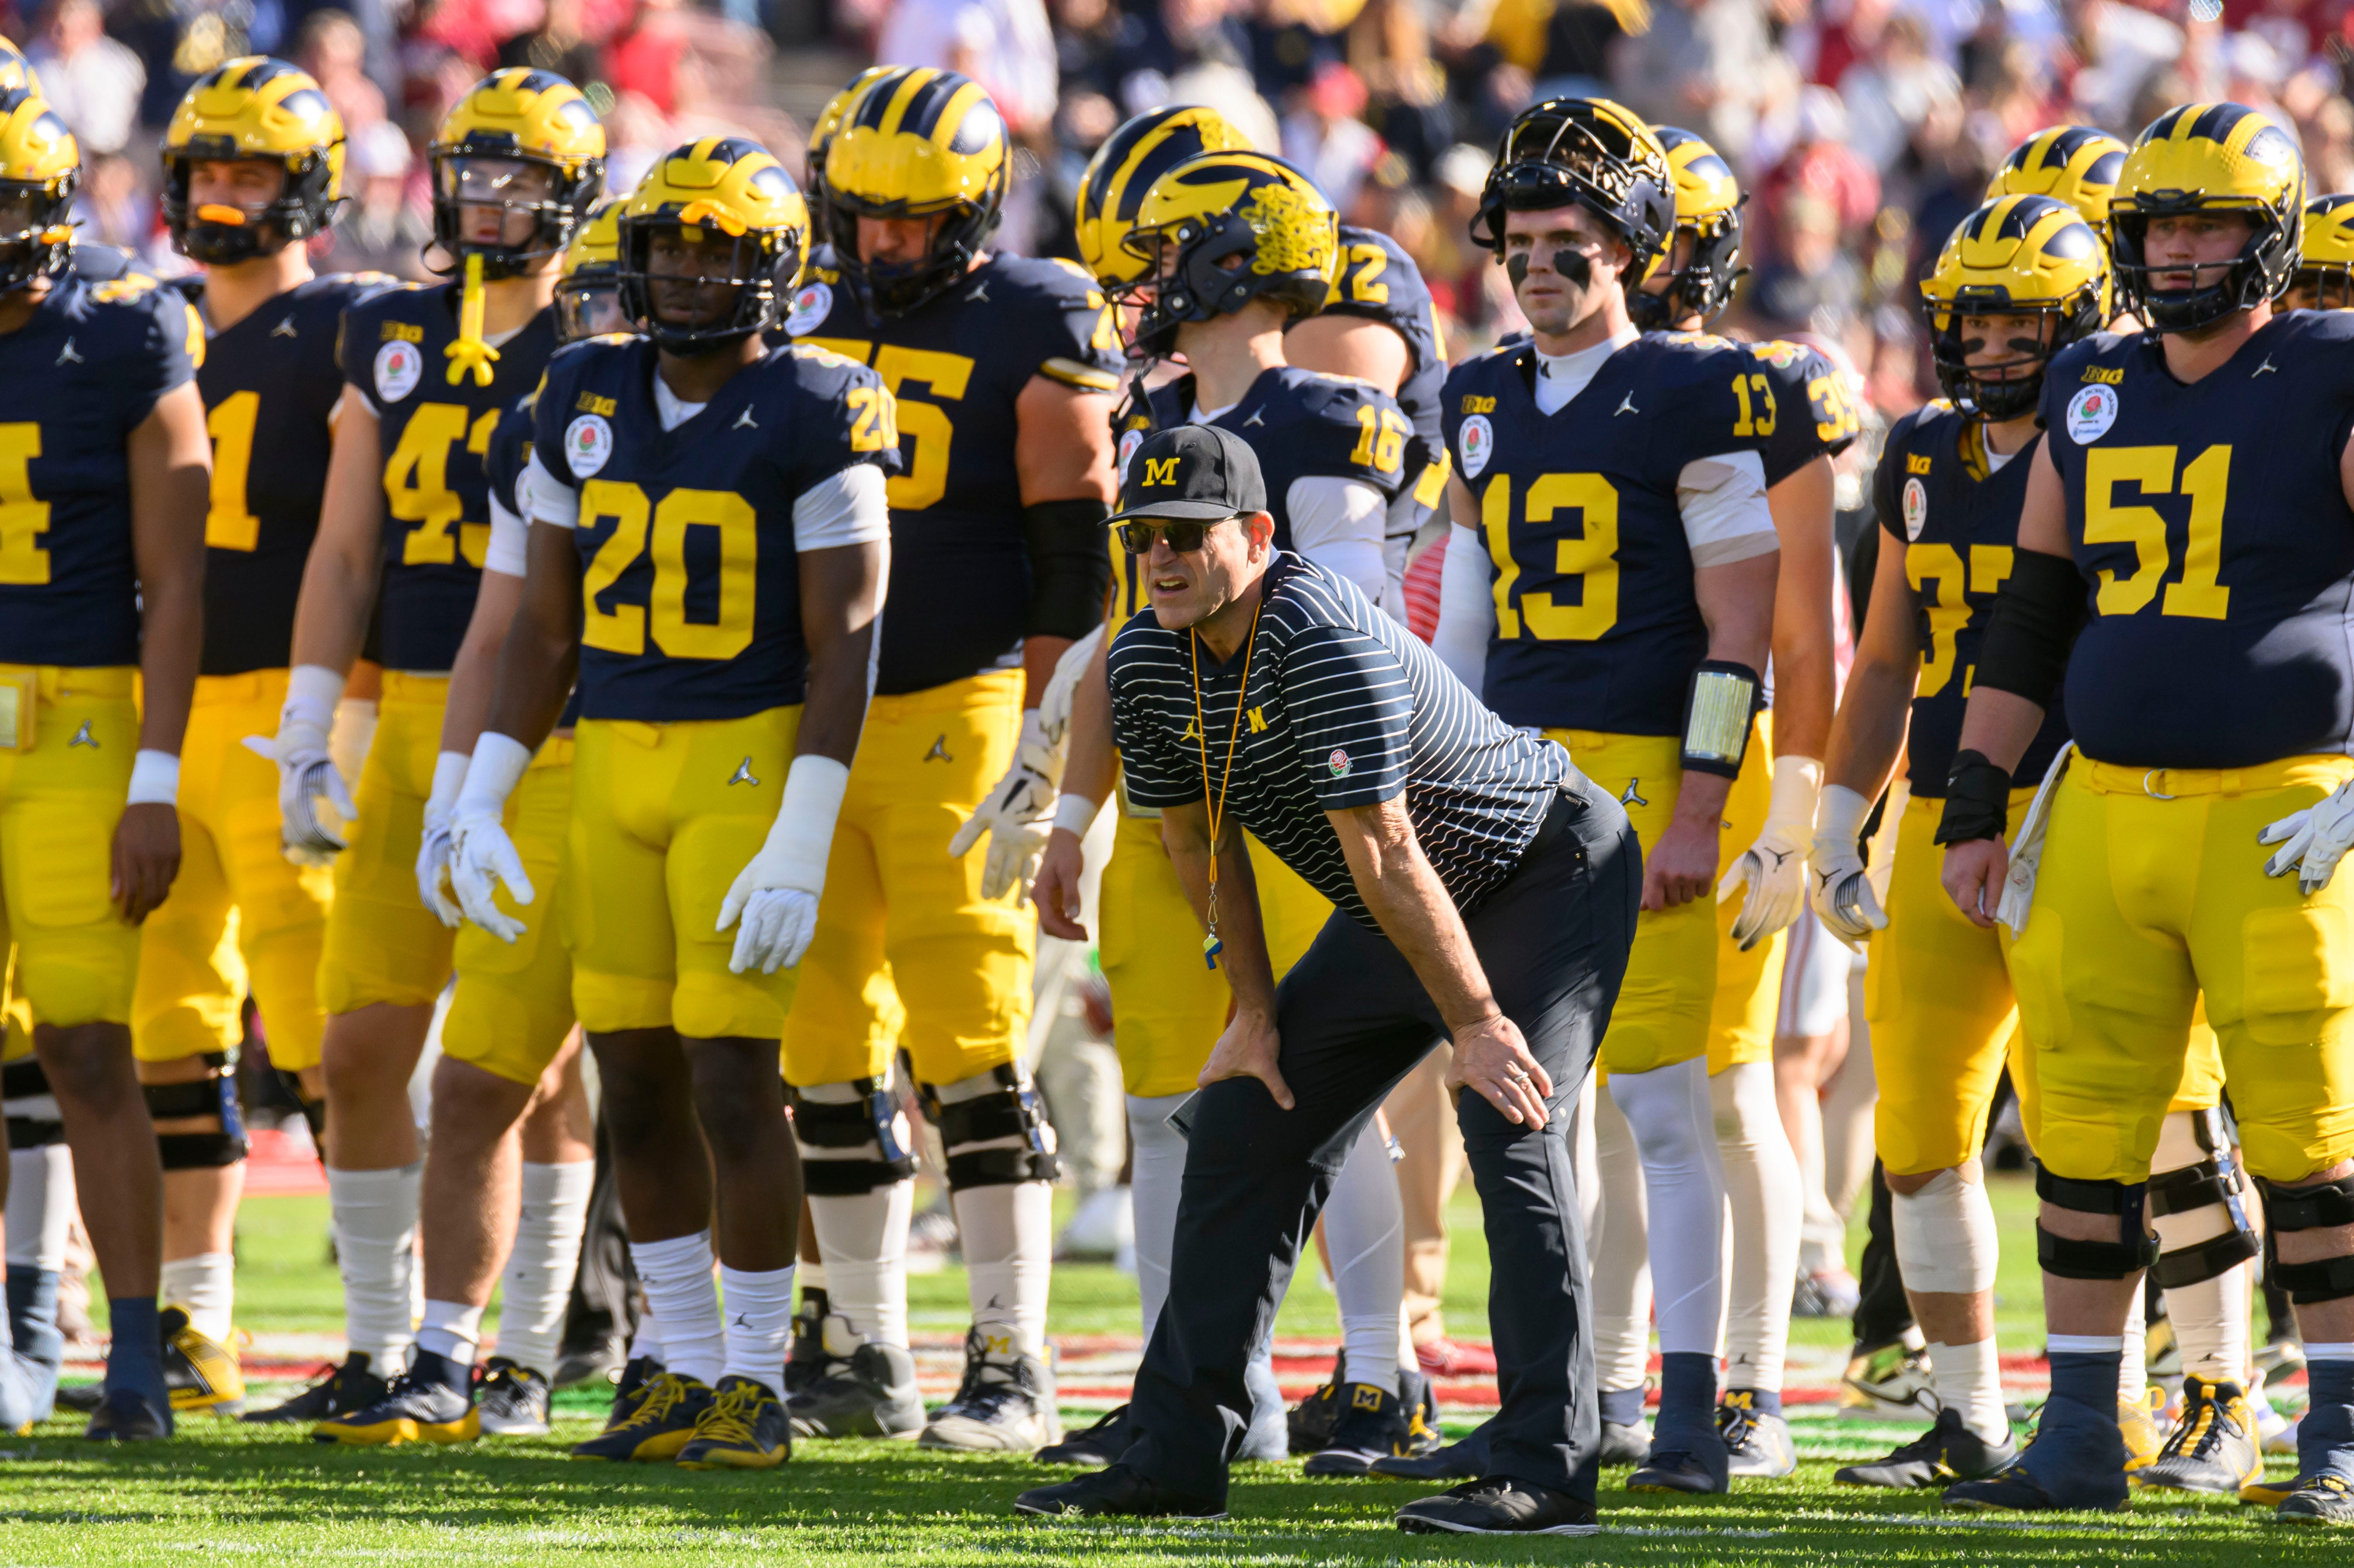 Michigan head coach Jim Harbaugh keeps an eye on his team during warmups before the start of the Rose Bowl, in Pasadena, California, January 1, 2024.